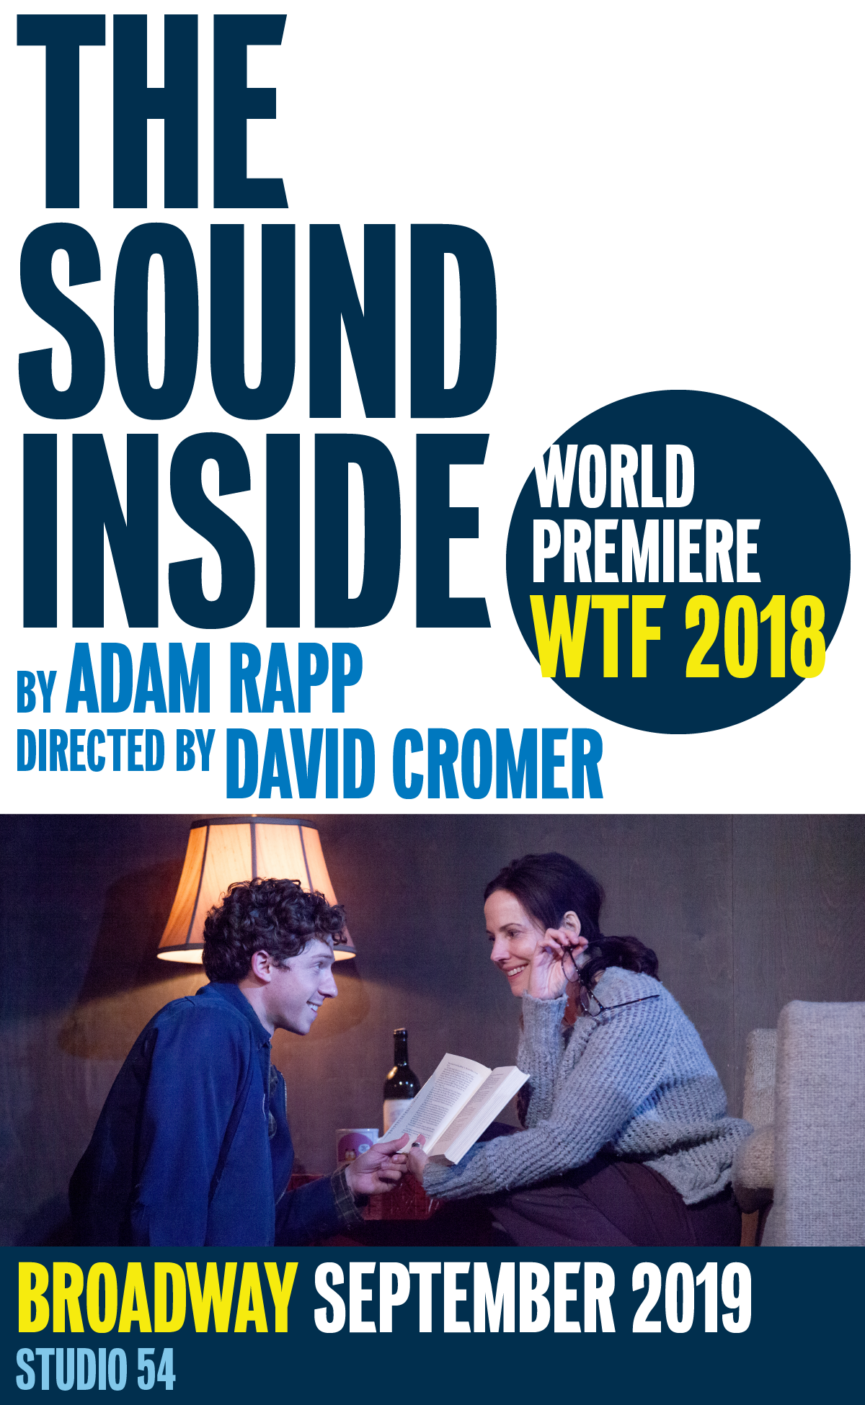 The Sound Inside, by Adam Rapp, directed by David Cromer, World Premiere at WTF in 2018, On Broadway September 2019 at Studio 54.